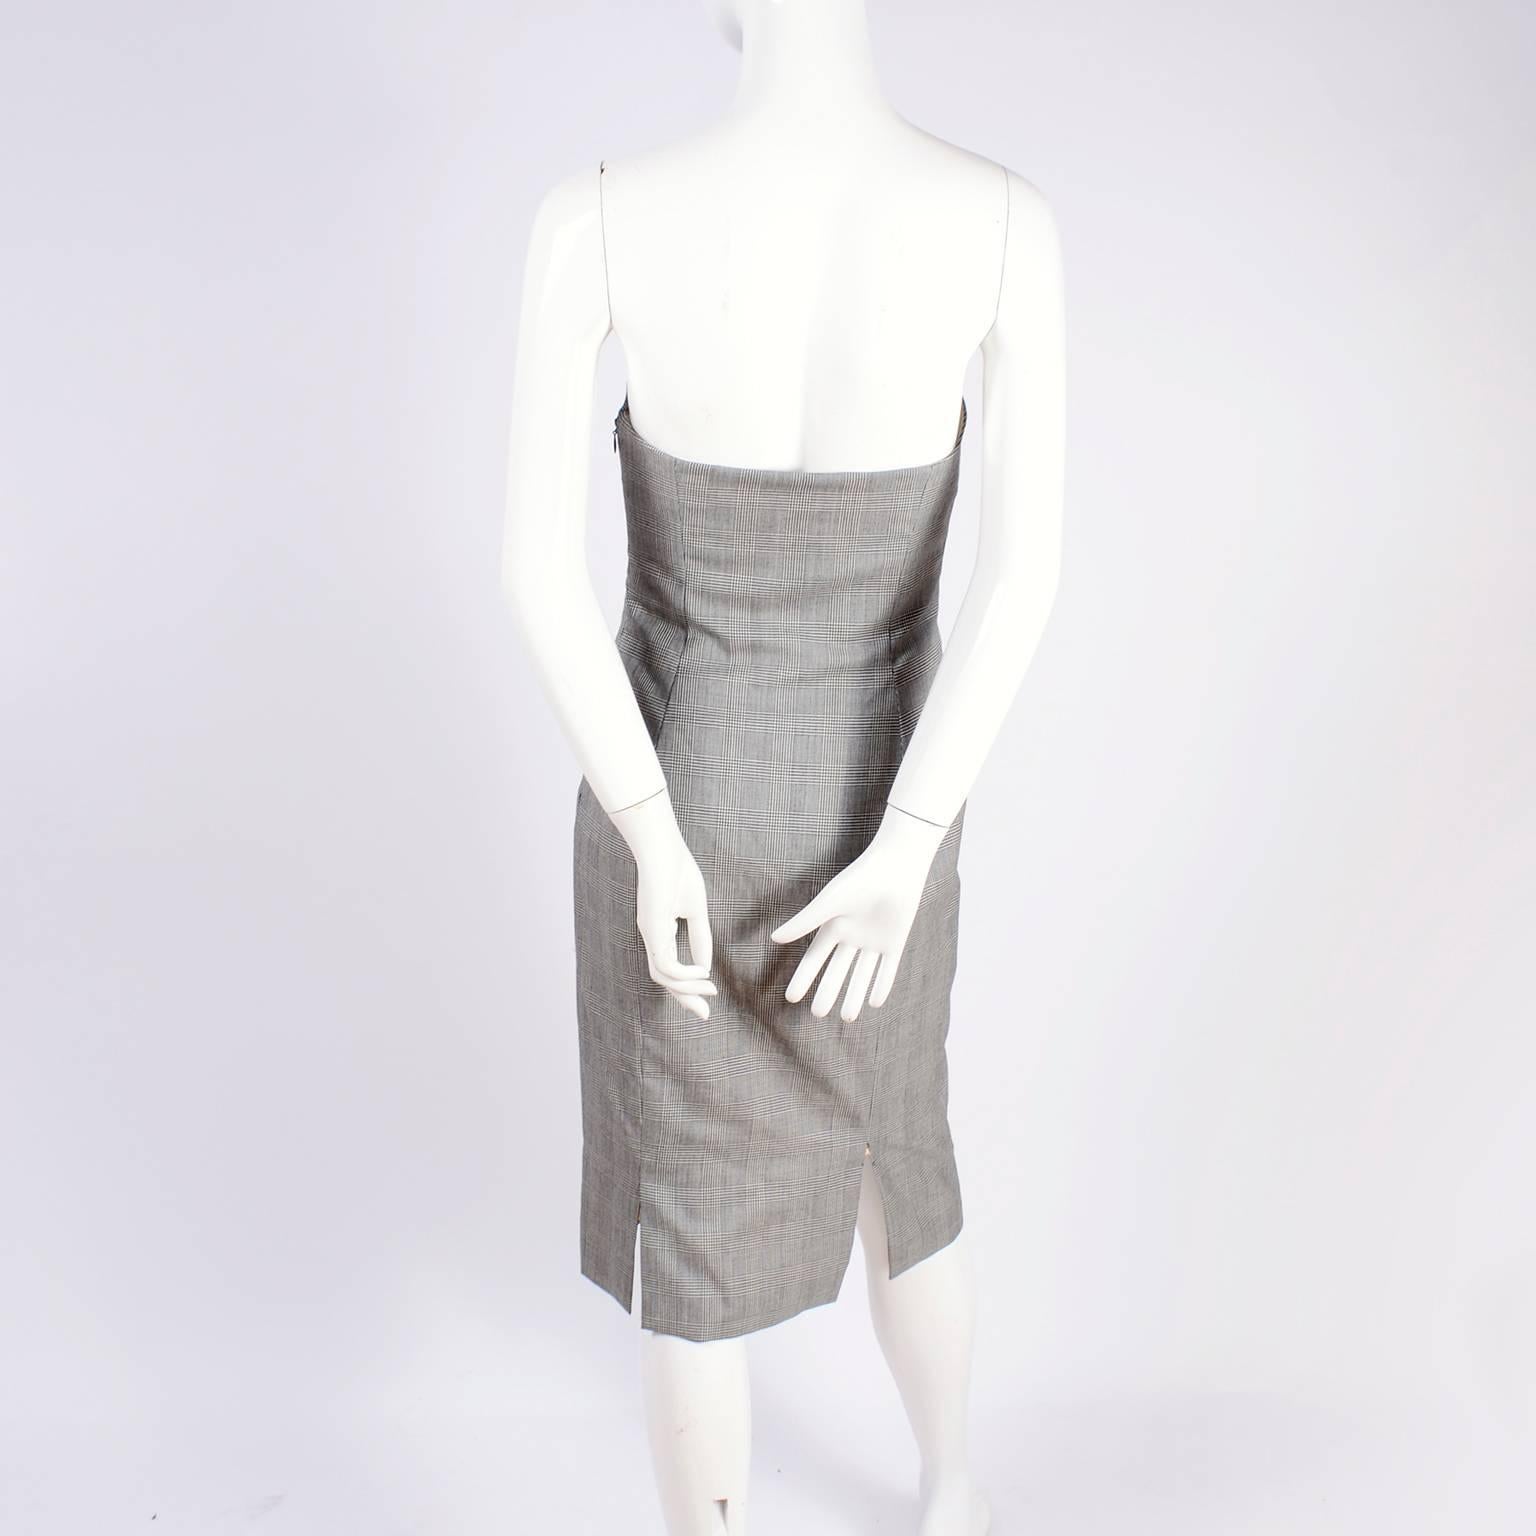 Versace Strapless Runway Dress in Houndstooth Plaid, Spring 1998 1